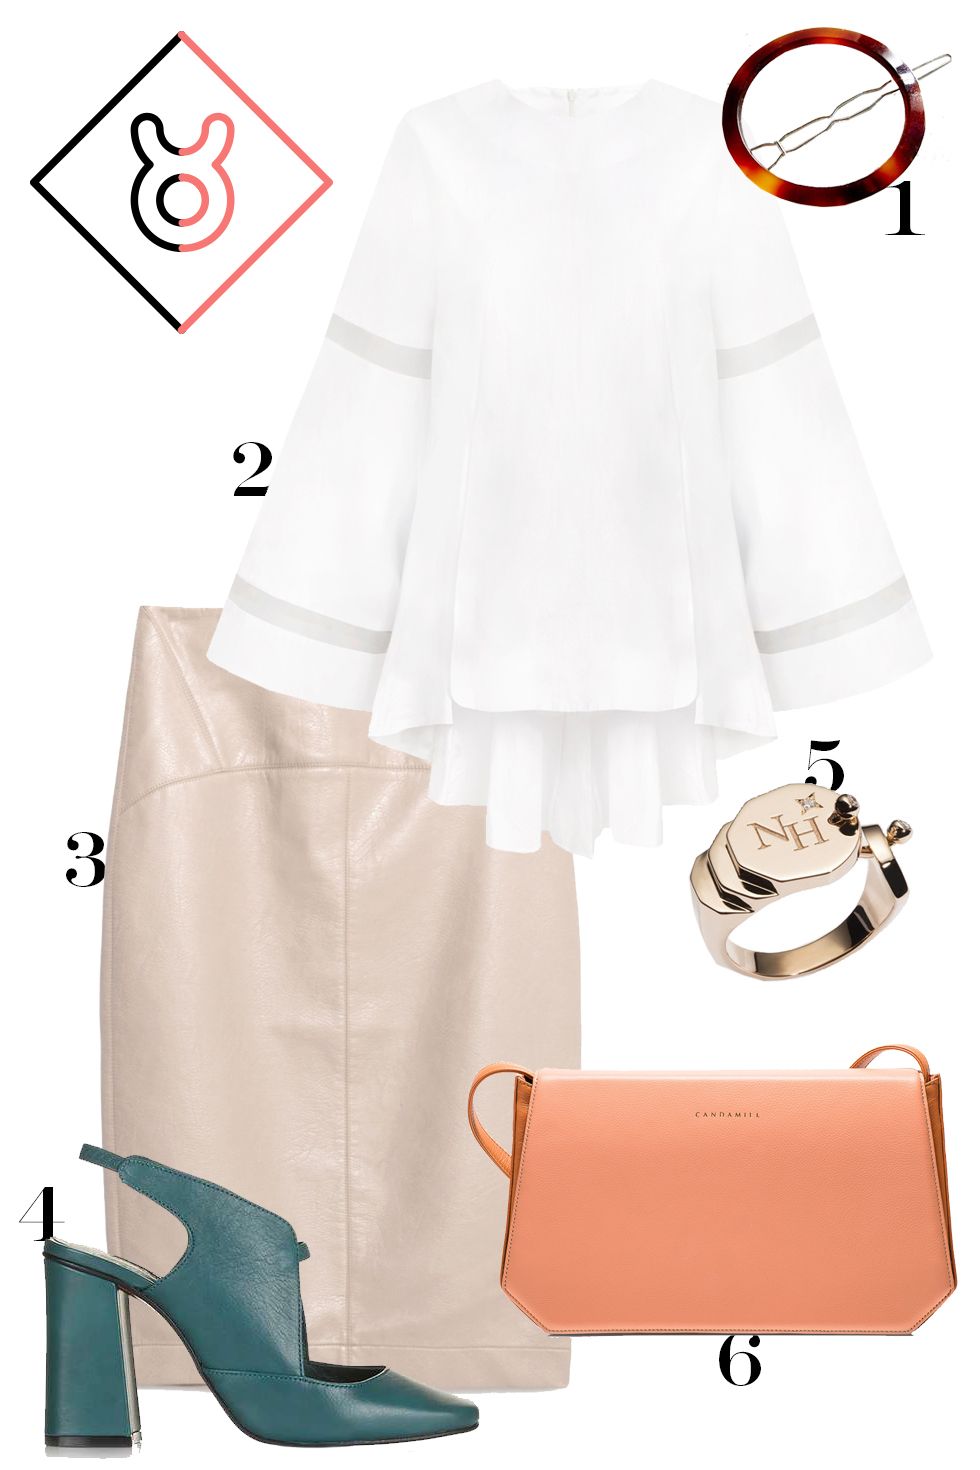 <p>Left to your own devices, you might just look too...beige. Here, we add some interest with a sheer-panel bell-sleeve top and a standout bag and shoe. </p><p>1. Urban Outfitters tortoiseshell hair clip, $12, <a href="http://rstyle.me/n/bnj49nbqb8f">urbanoutfitters.com</a>.</p><p>2. Pixie Market bell-sleeve organza-panel top, $126, <a href="http://rstyle.me/n/bmivuzbqb8f">pixiemarket.com</a>.</p><p>3. Zara faux leather skirt, $40, <a href="http://www.zara.com/us/en/woman/skirts/midi/faded-faux-leather-pencil-skirt-c401024p3275469.html">zara.com</a>.</p><p>4. Topshop slingback shoes, $130, <a href="http://rstyle.me/n/bnj47rbqb8f">topshop.com</a>.</p><p>5. Nouvel Heritage signet ring, $2,200, <a href="http://www.nouvelheritage.com/products/gold-signet-ring">nouvelheritage.com</a>.</p><p>6. Candamill leather bag, $900, <a href="http://www.candamill.com/shop-candamill-accessories/eero-terracotta">candamill.com</a>.</p>